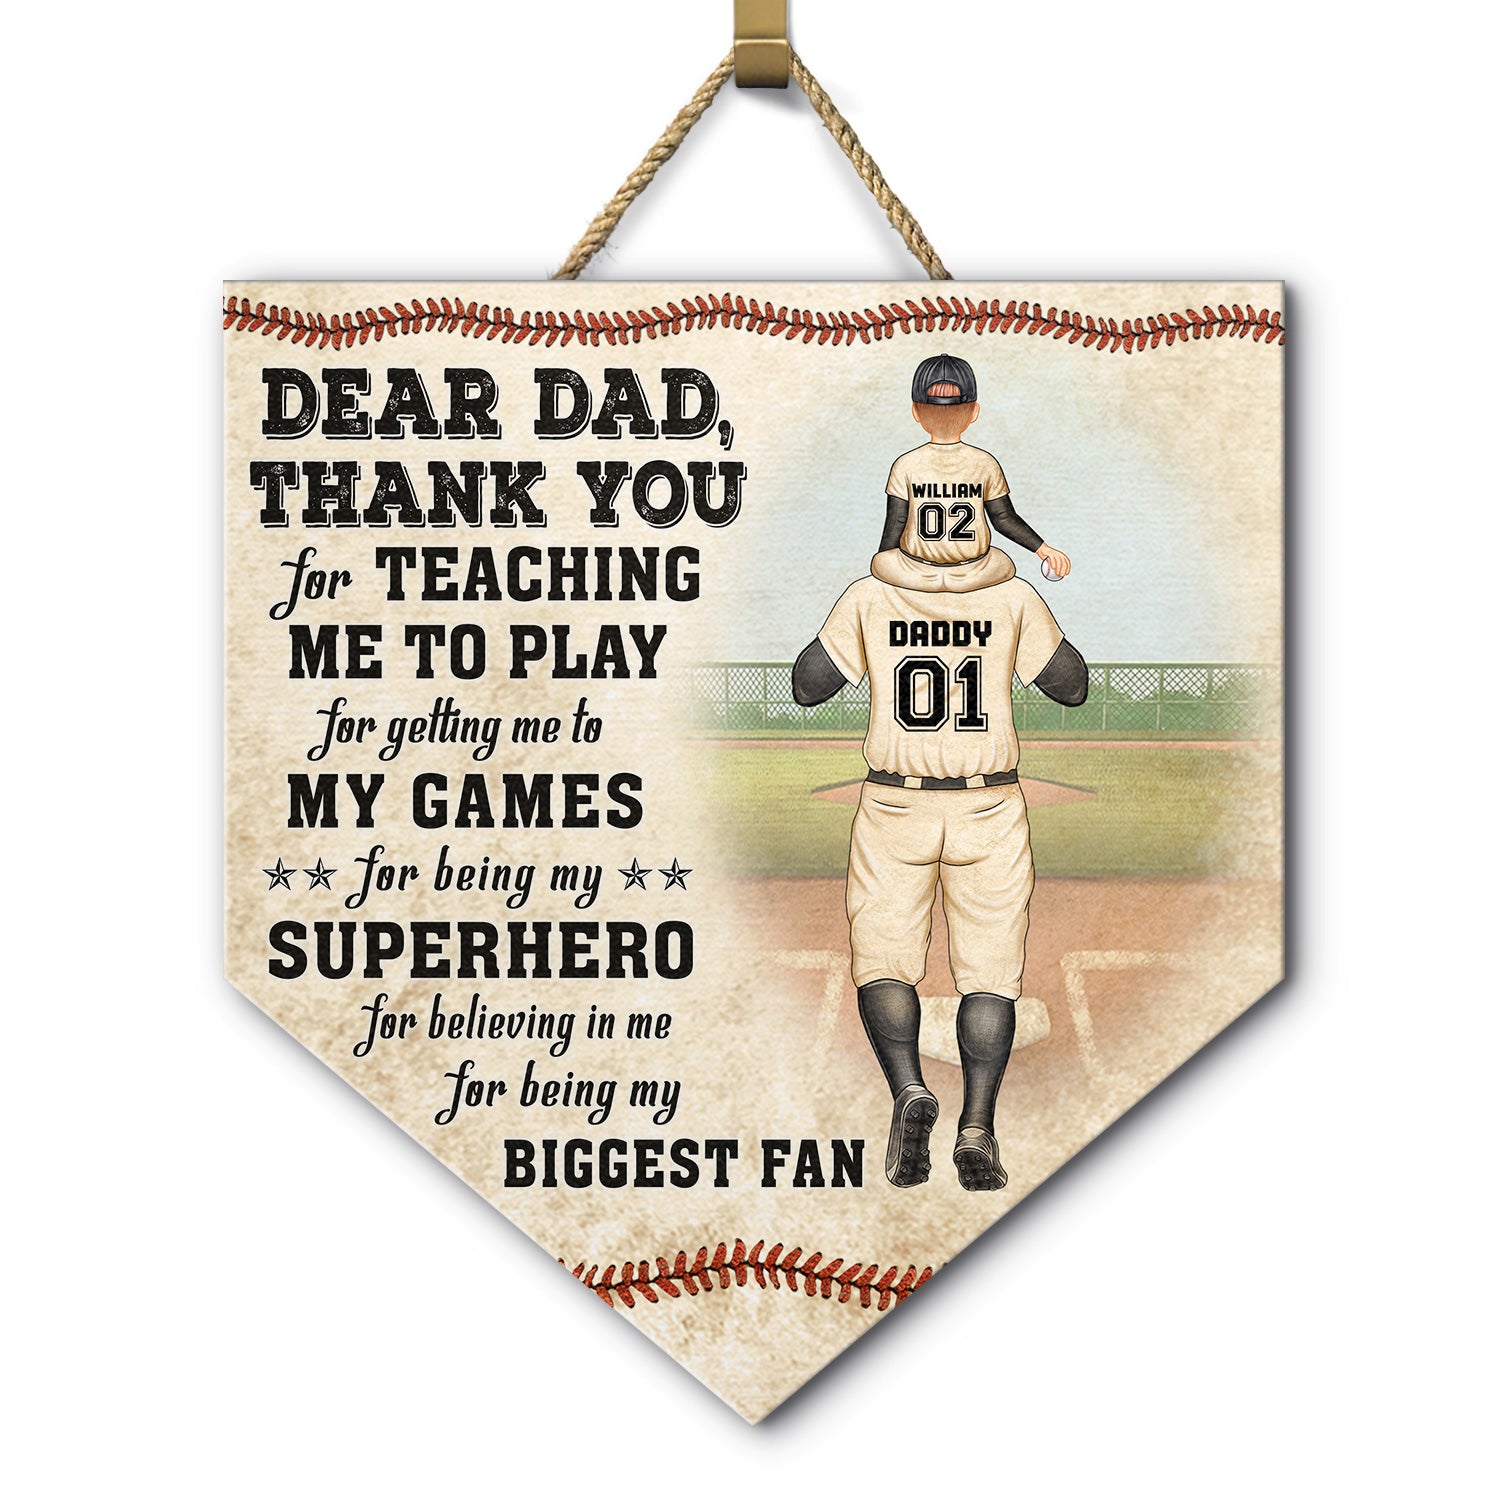 Dear Dad Thank You For Teaching Me - Gift For Father, Baseball Fans, Softball - Personalized Custom Shaped Wood Sign